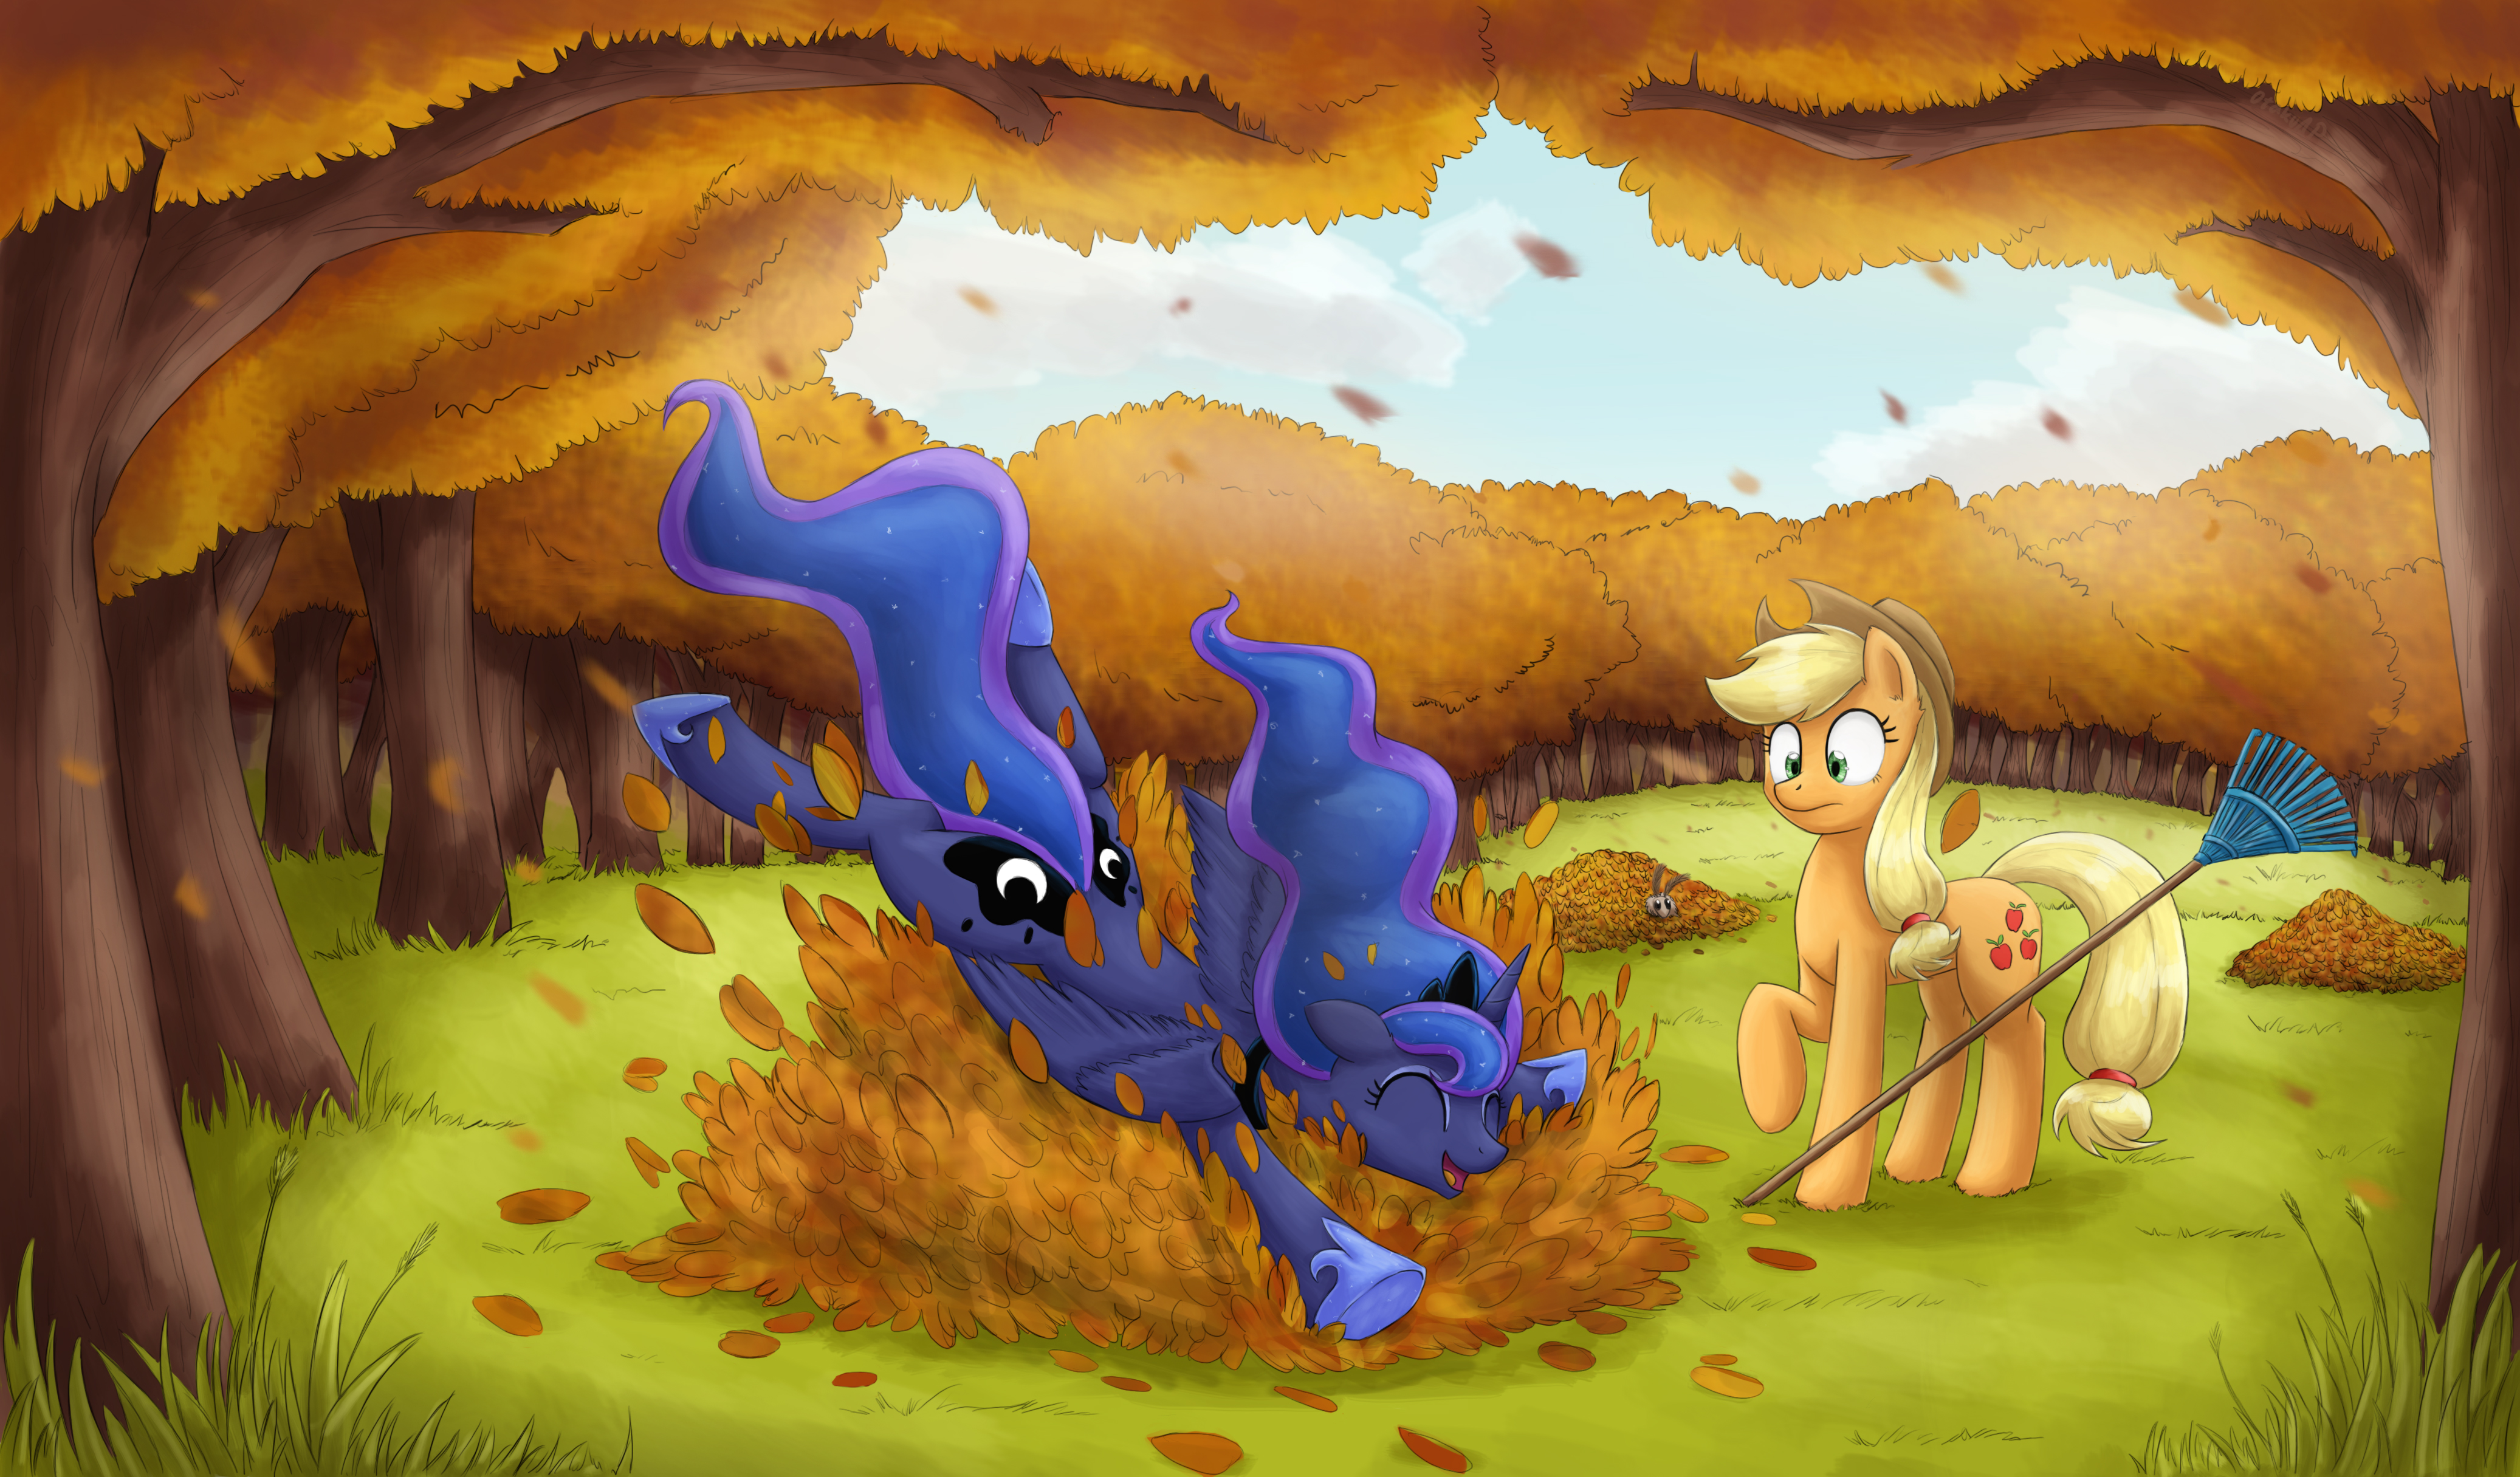 piles_of_leaves_are_fun_for_every_pony__by_otakuap-d6oxwe3.jpg